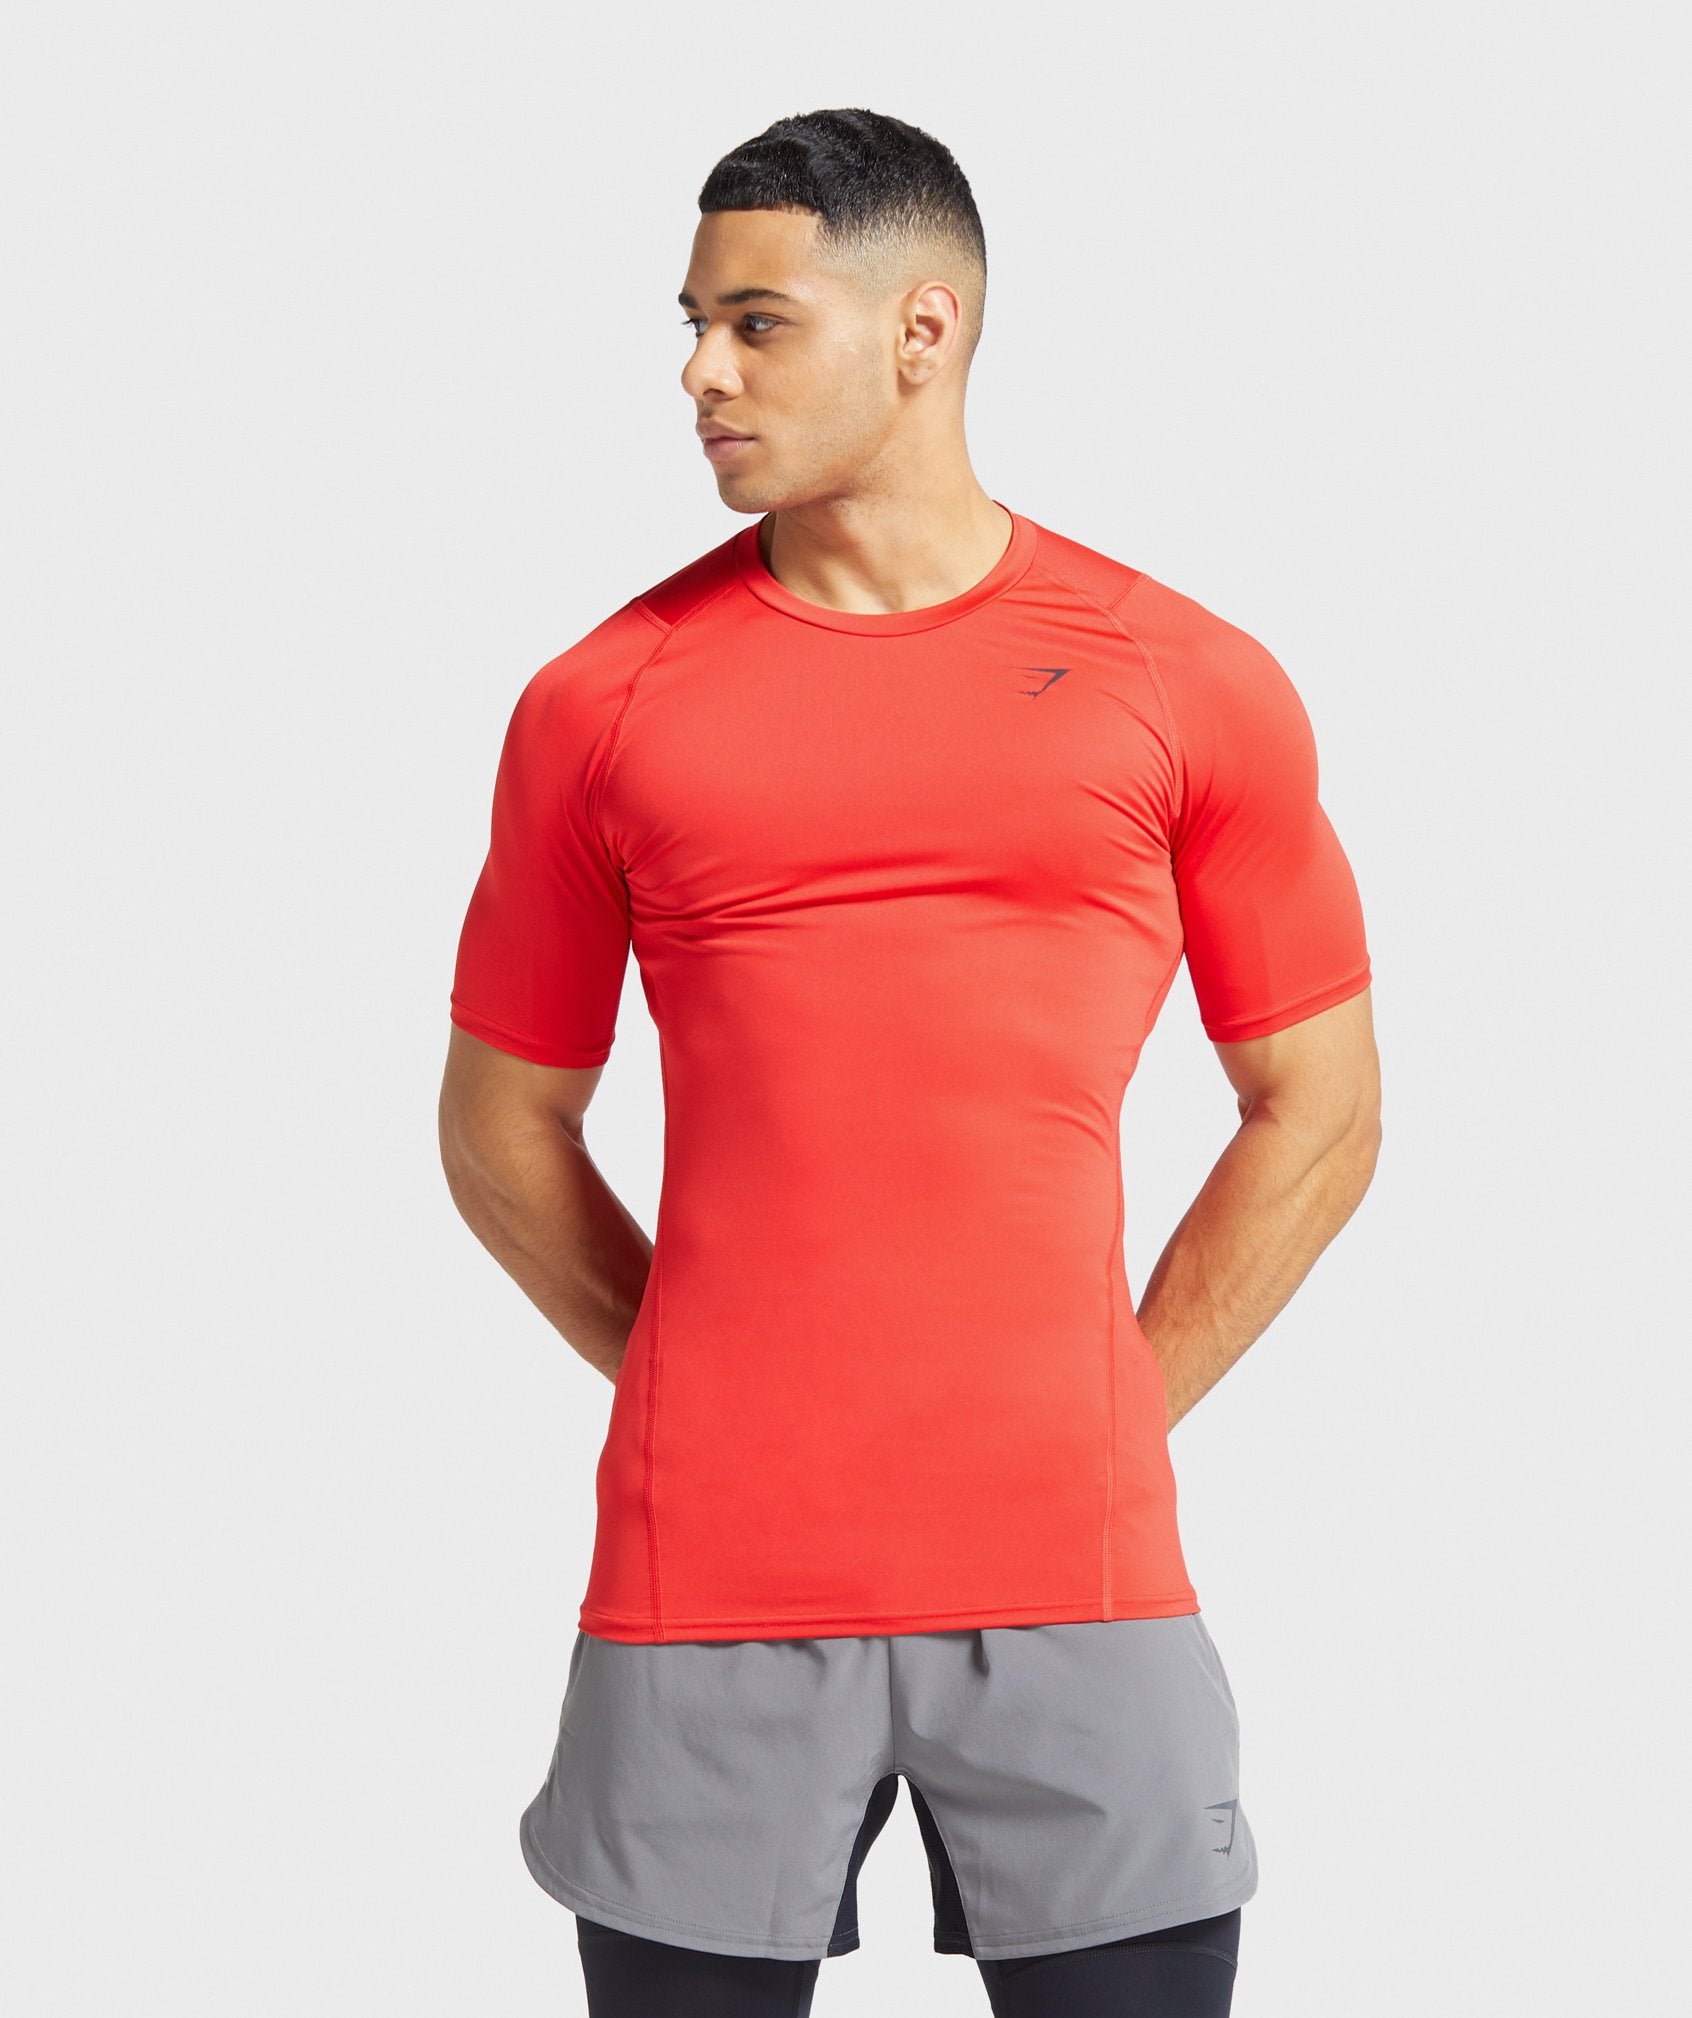 Element Baselayer T-Shirt in Red - view 1